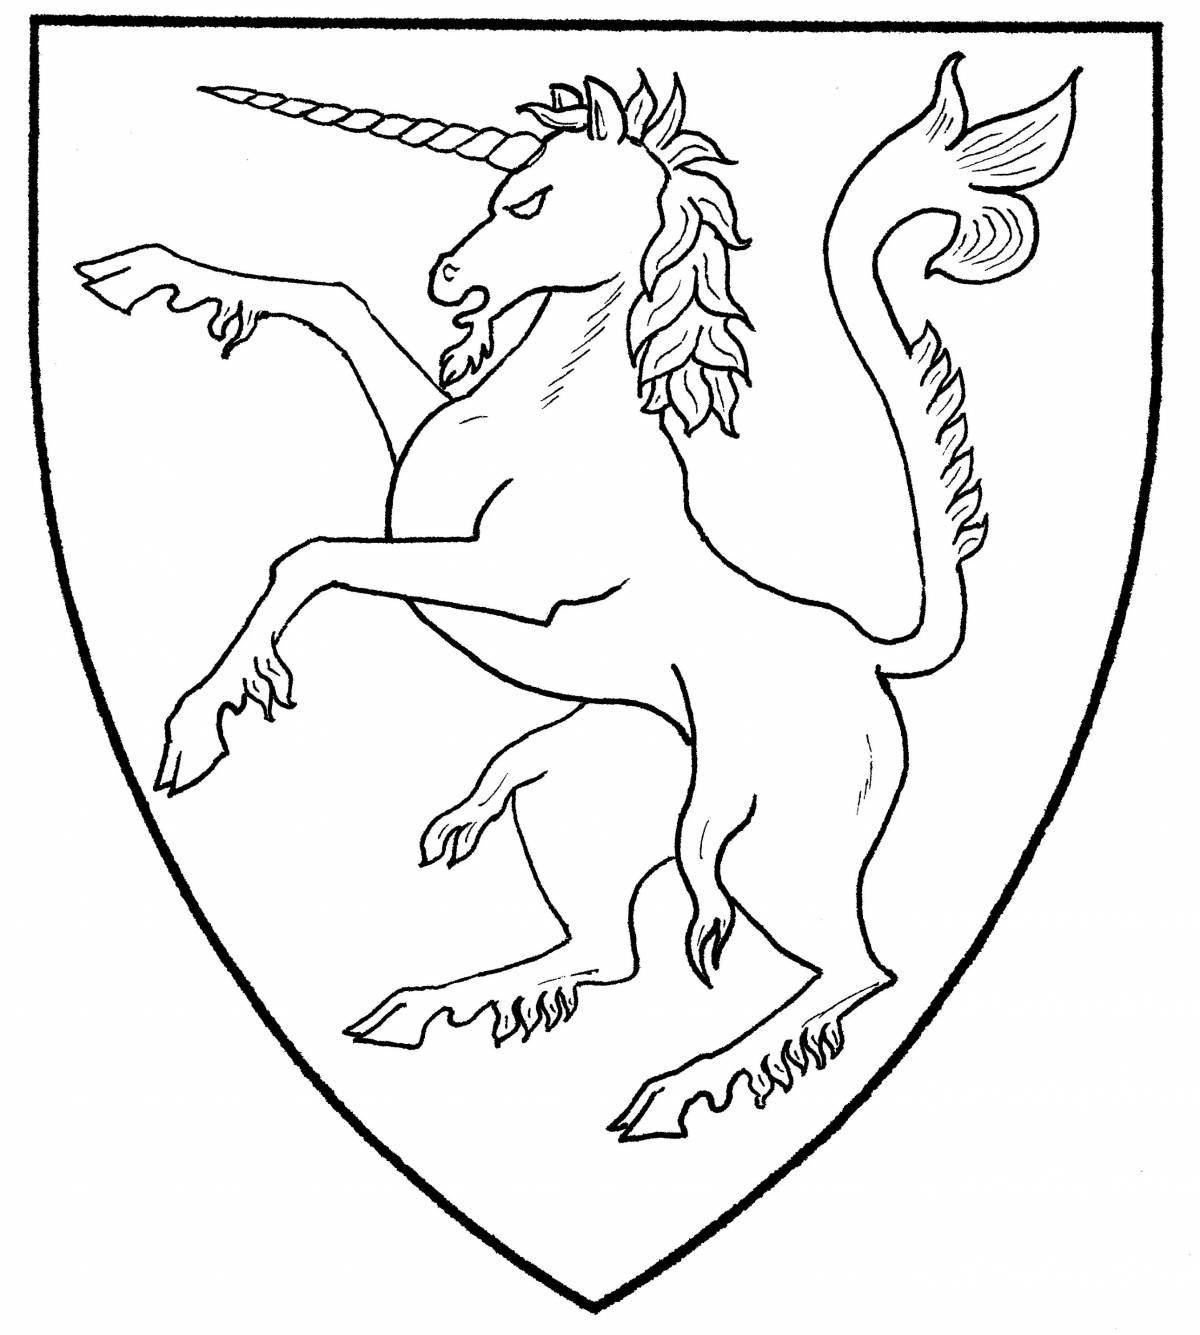 Delightful coat of arms of odintsovo for children